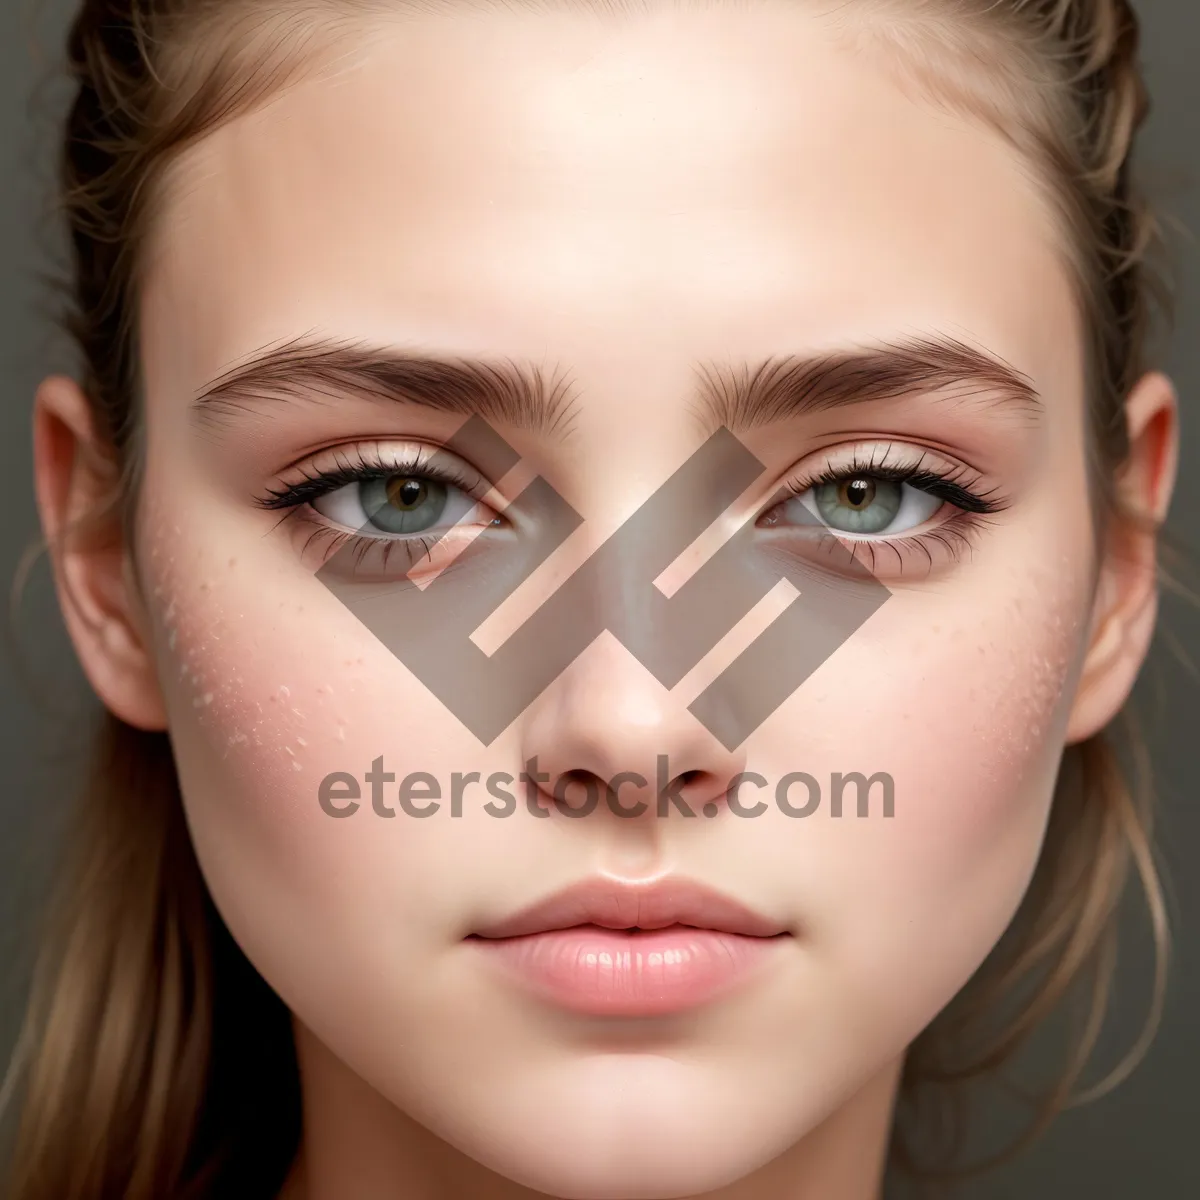 Picture of Glamorous Beauty: Stylish Closeup of Attractive Model's Face